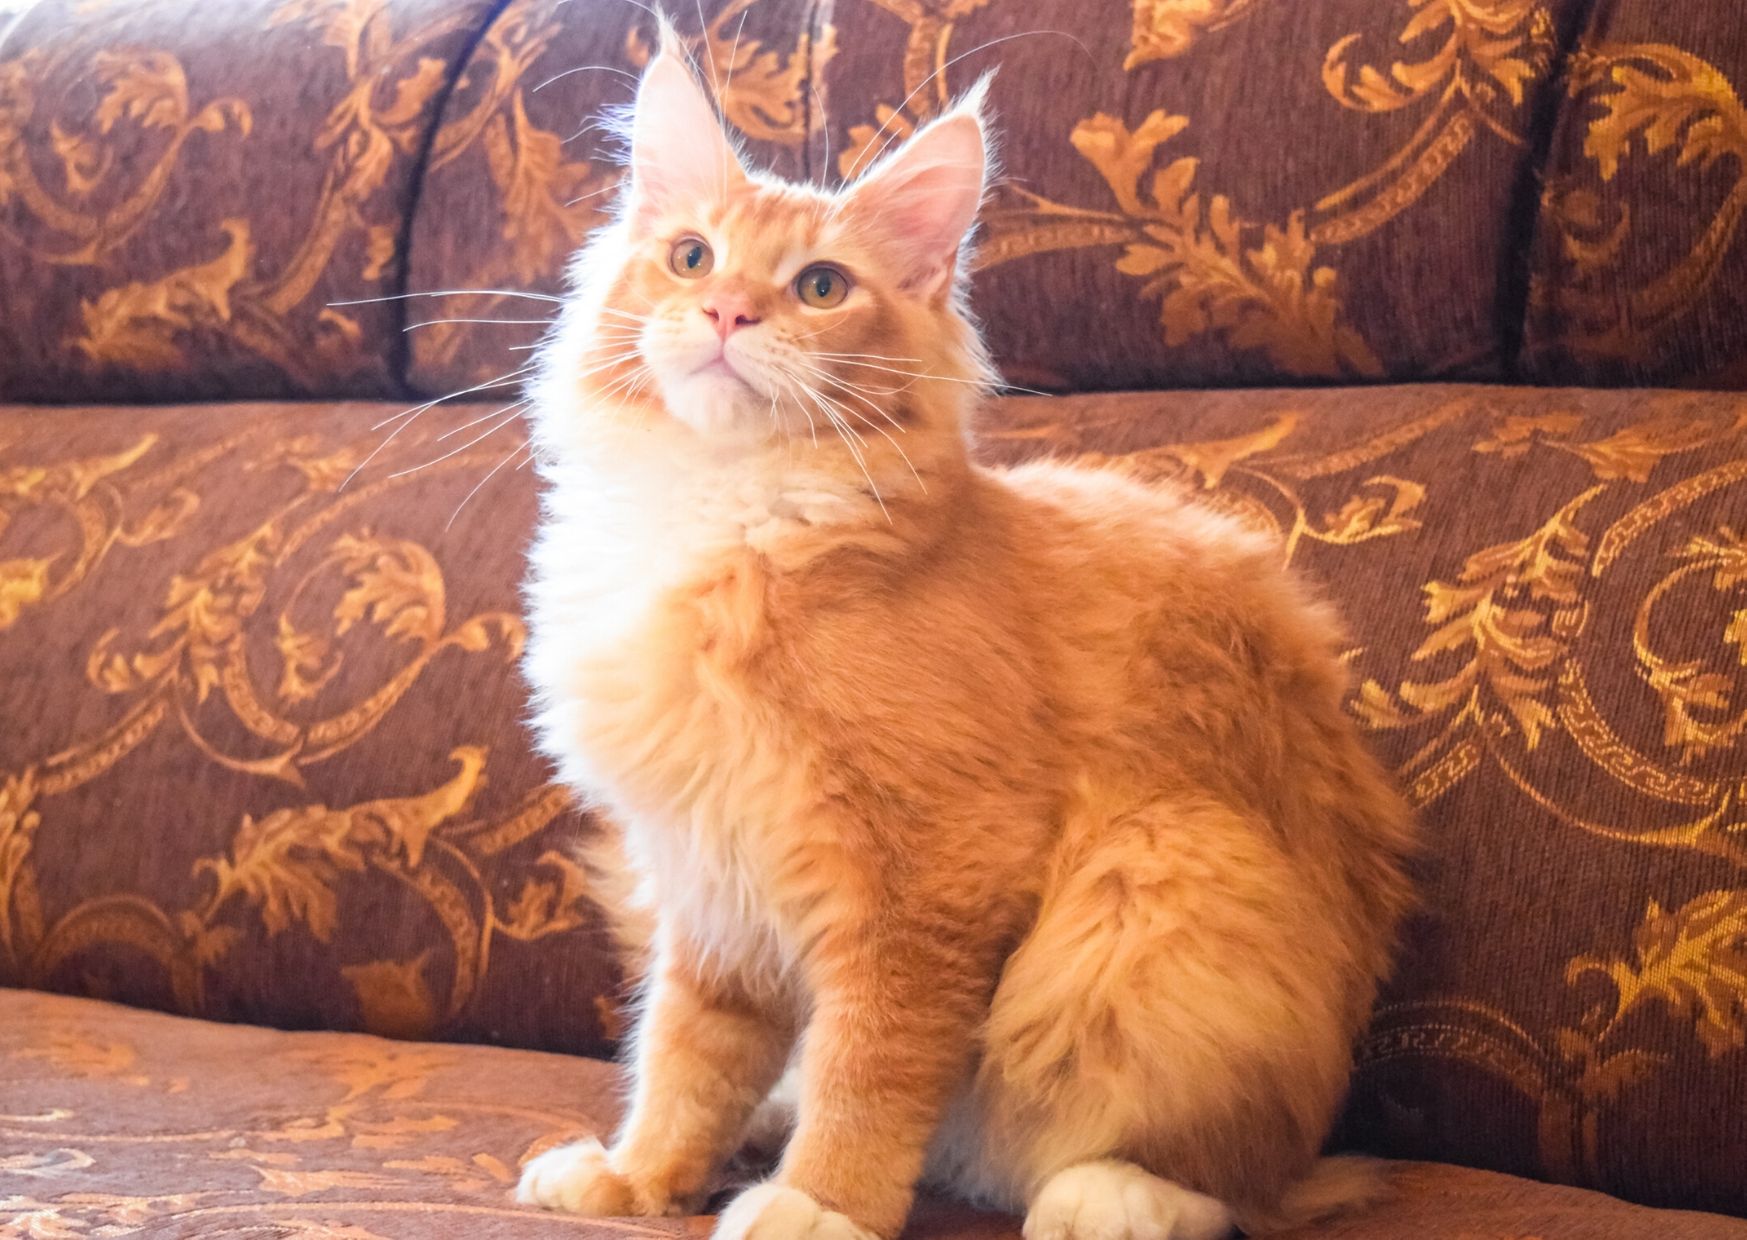 About the Orange Maine Coon cat You may be suprised!